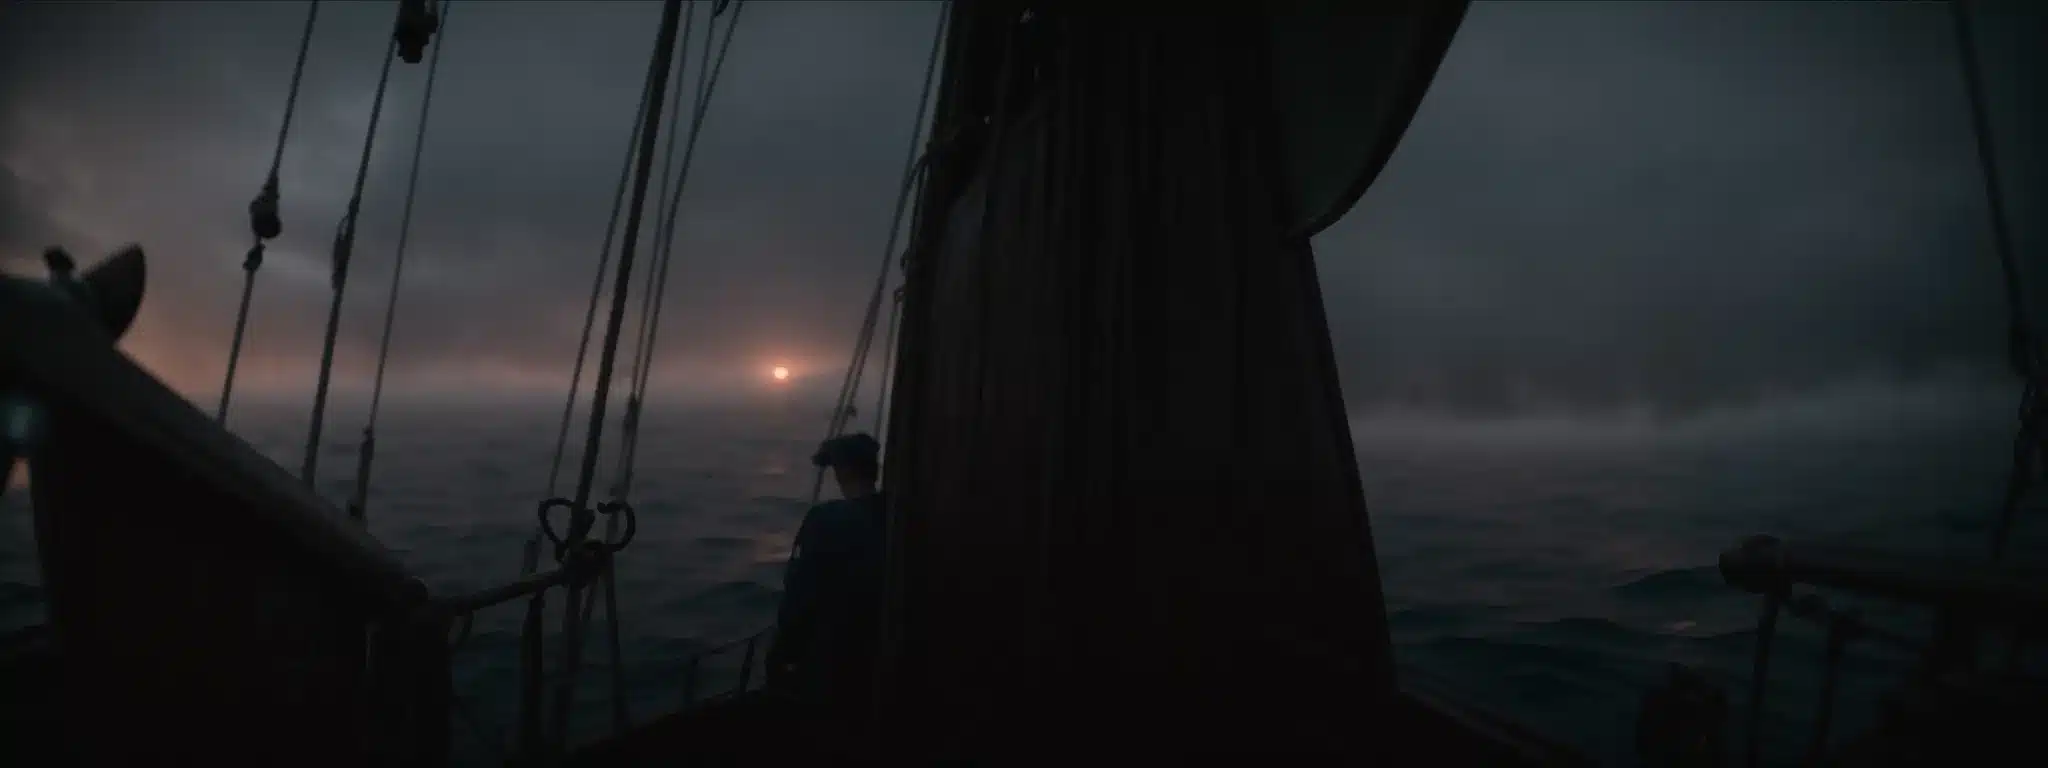 A Person Stands At The Helm Of An Old-World Sailing Ship, Navigating Through Misty Seas At Dawn.